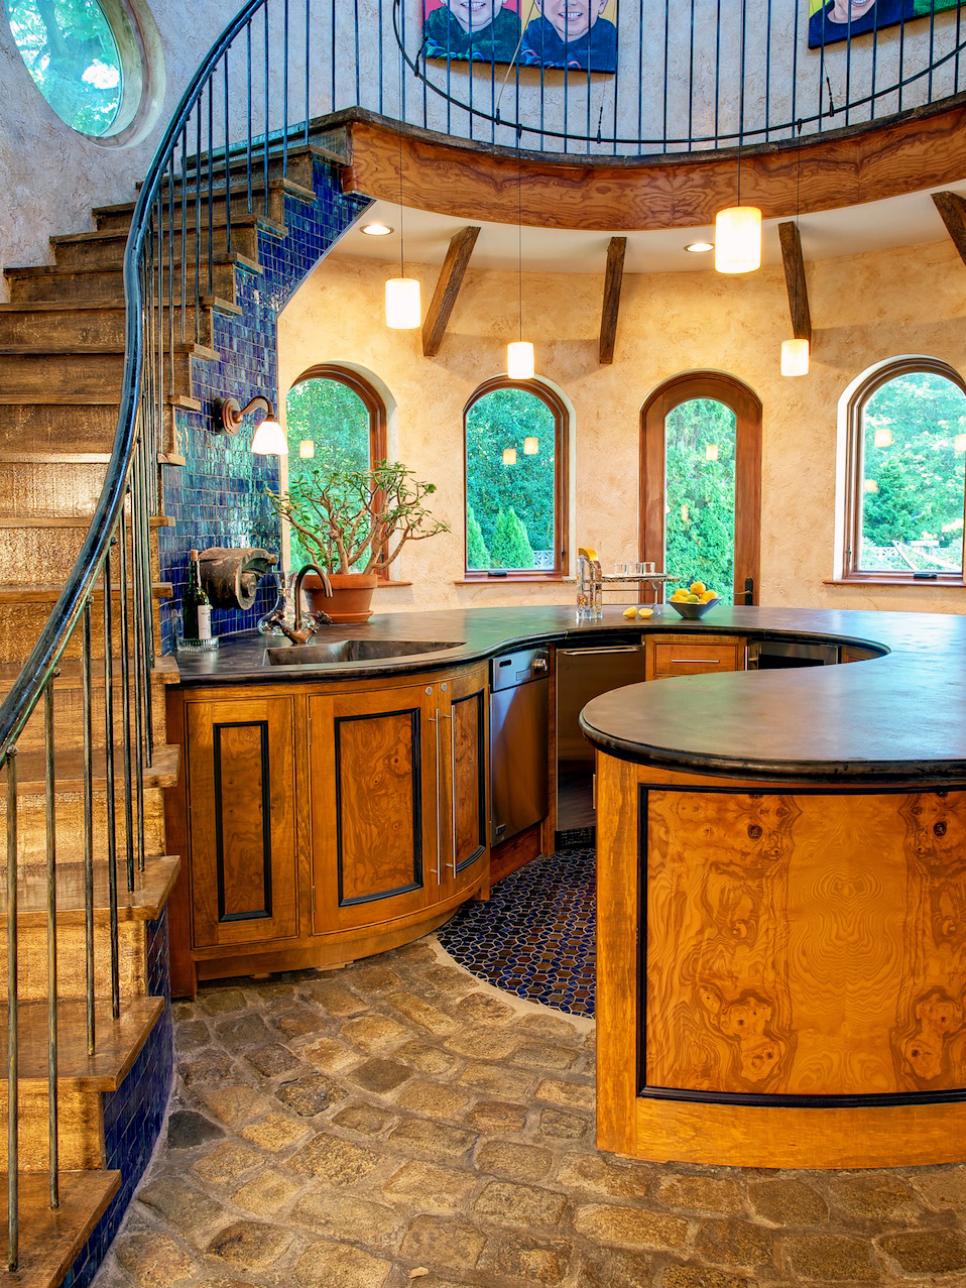 Eclectic Semi-Circular Bar With Arched Windows